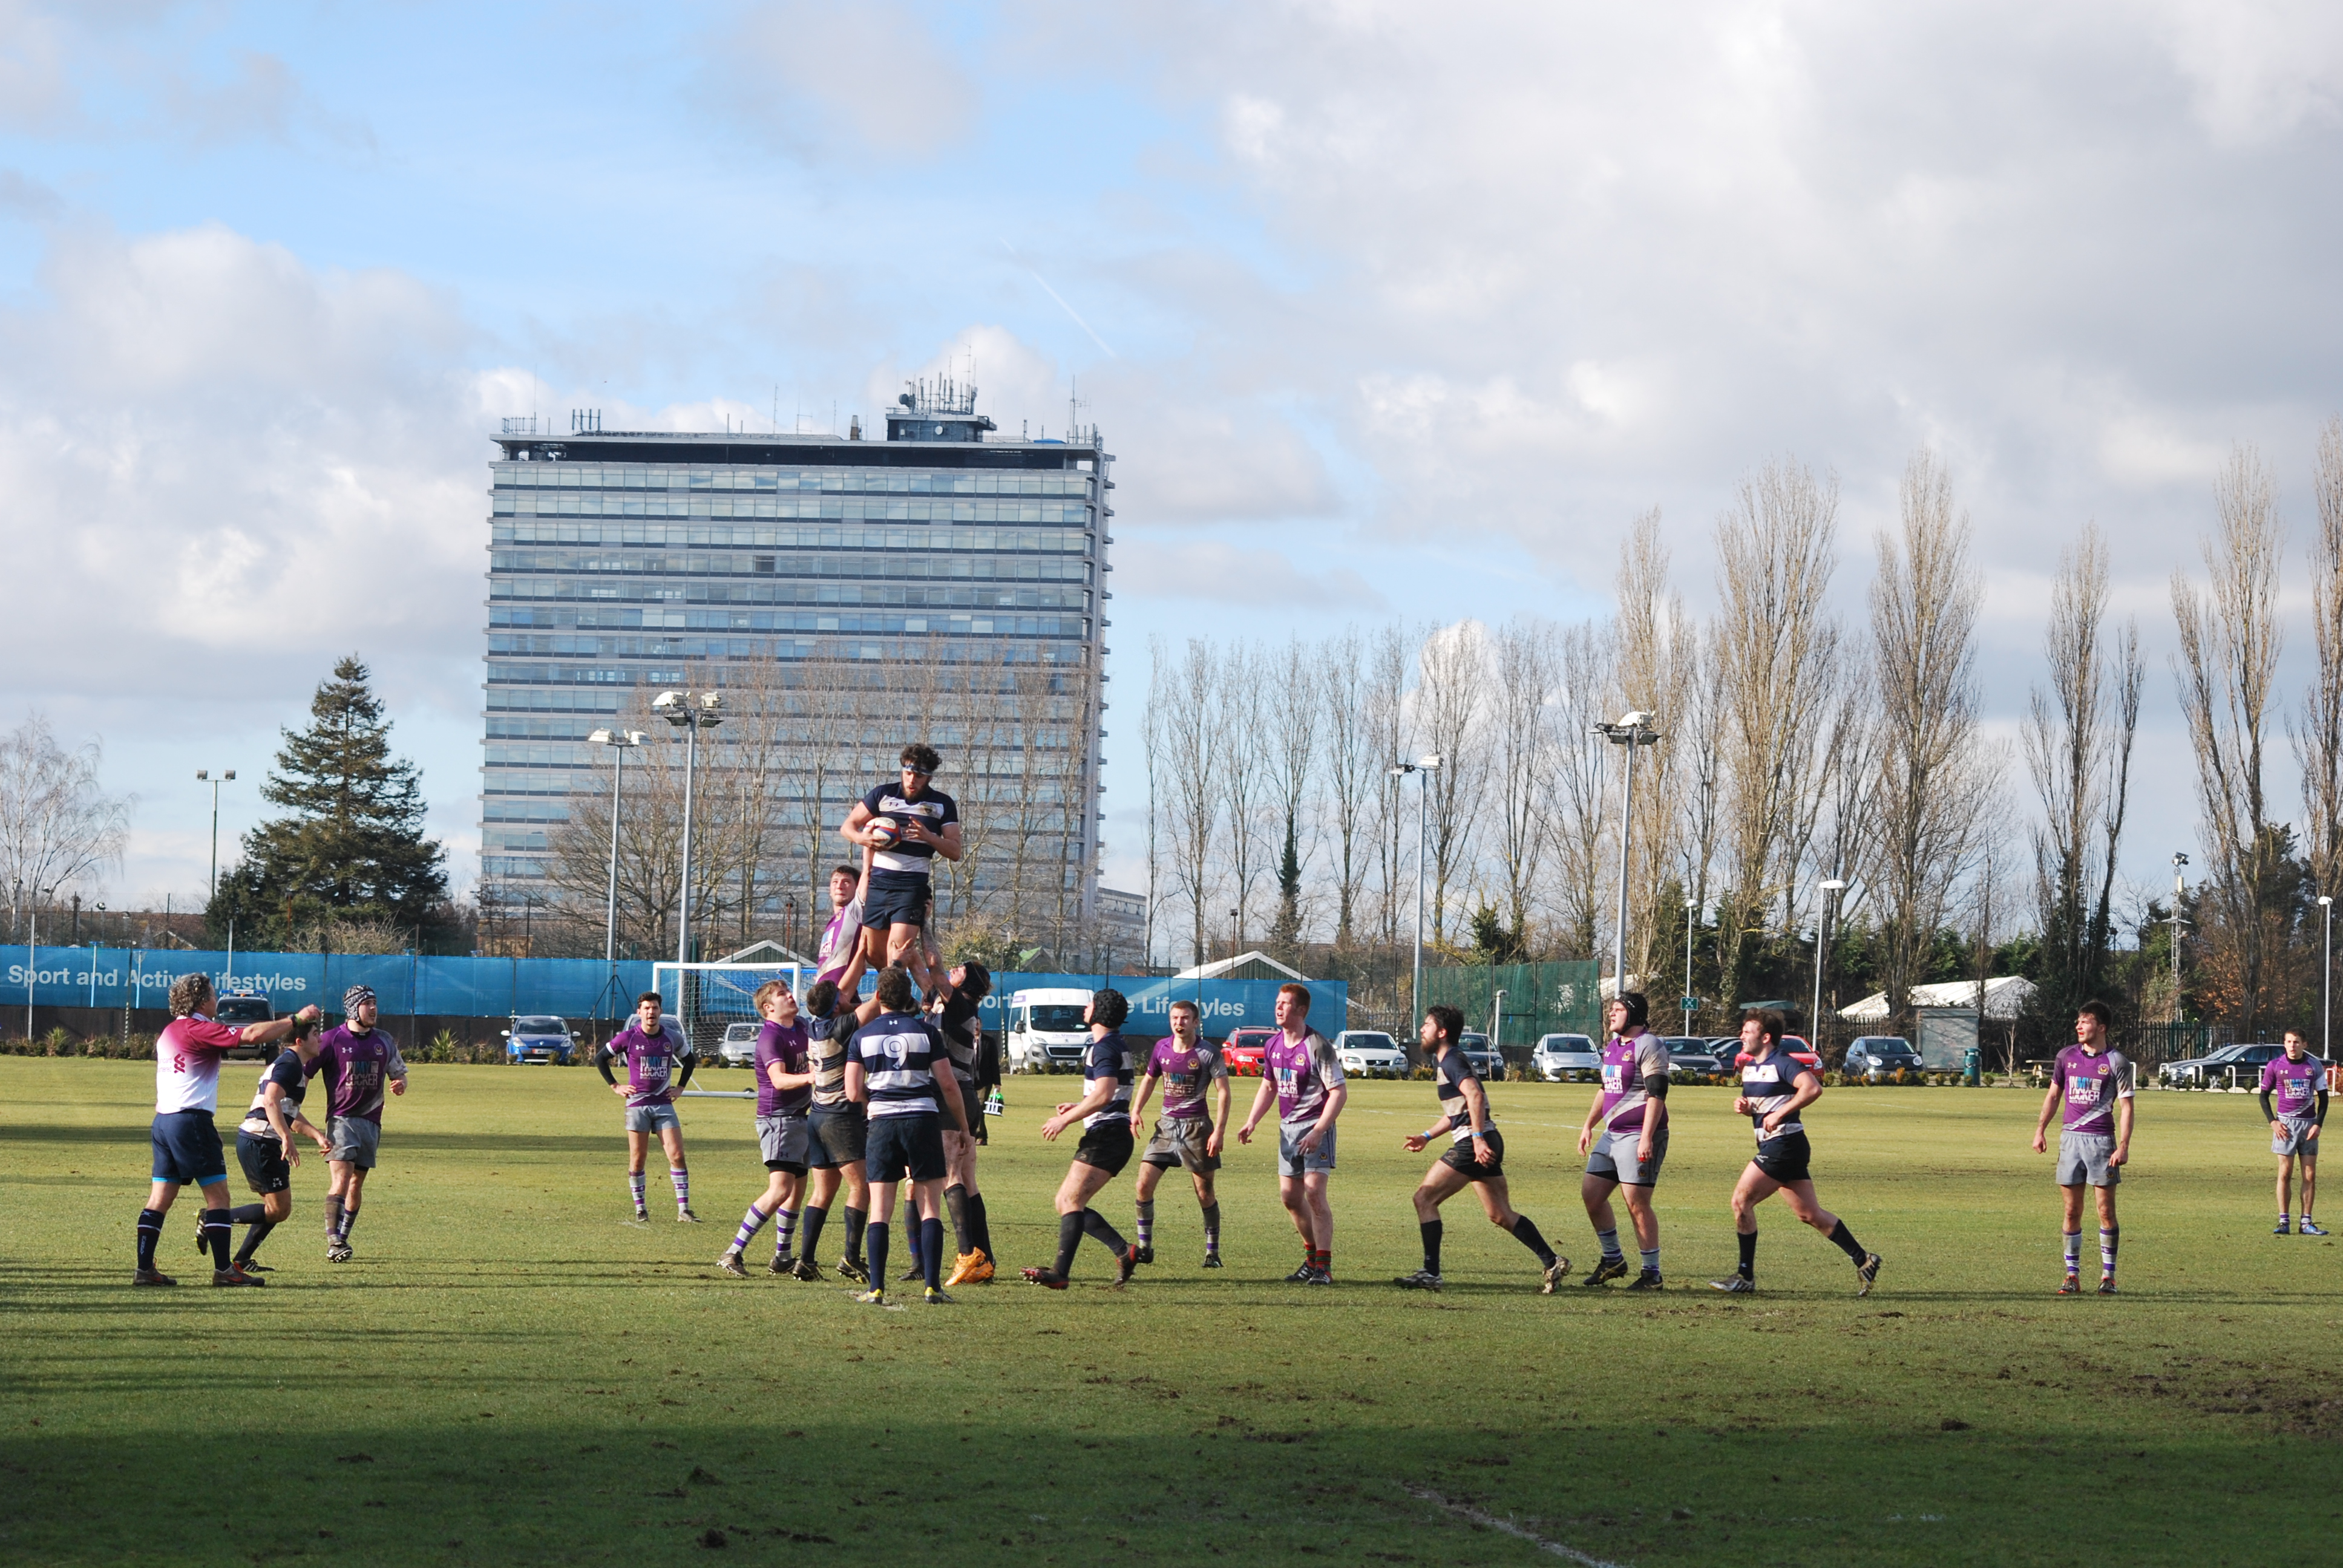 Kingston rugby beat Portsmouth to go top of table